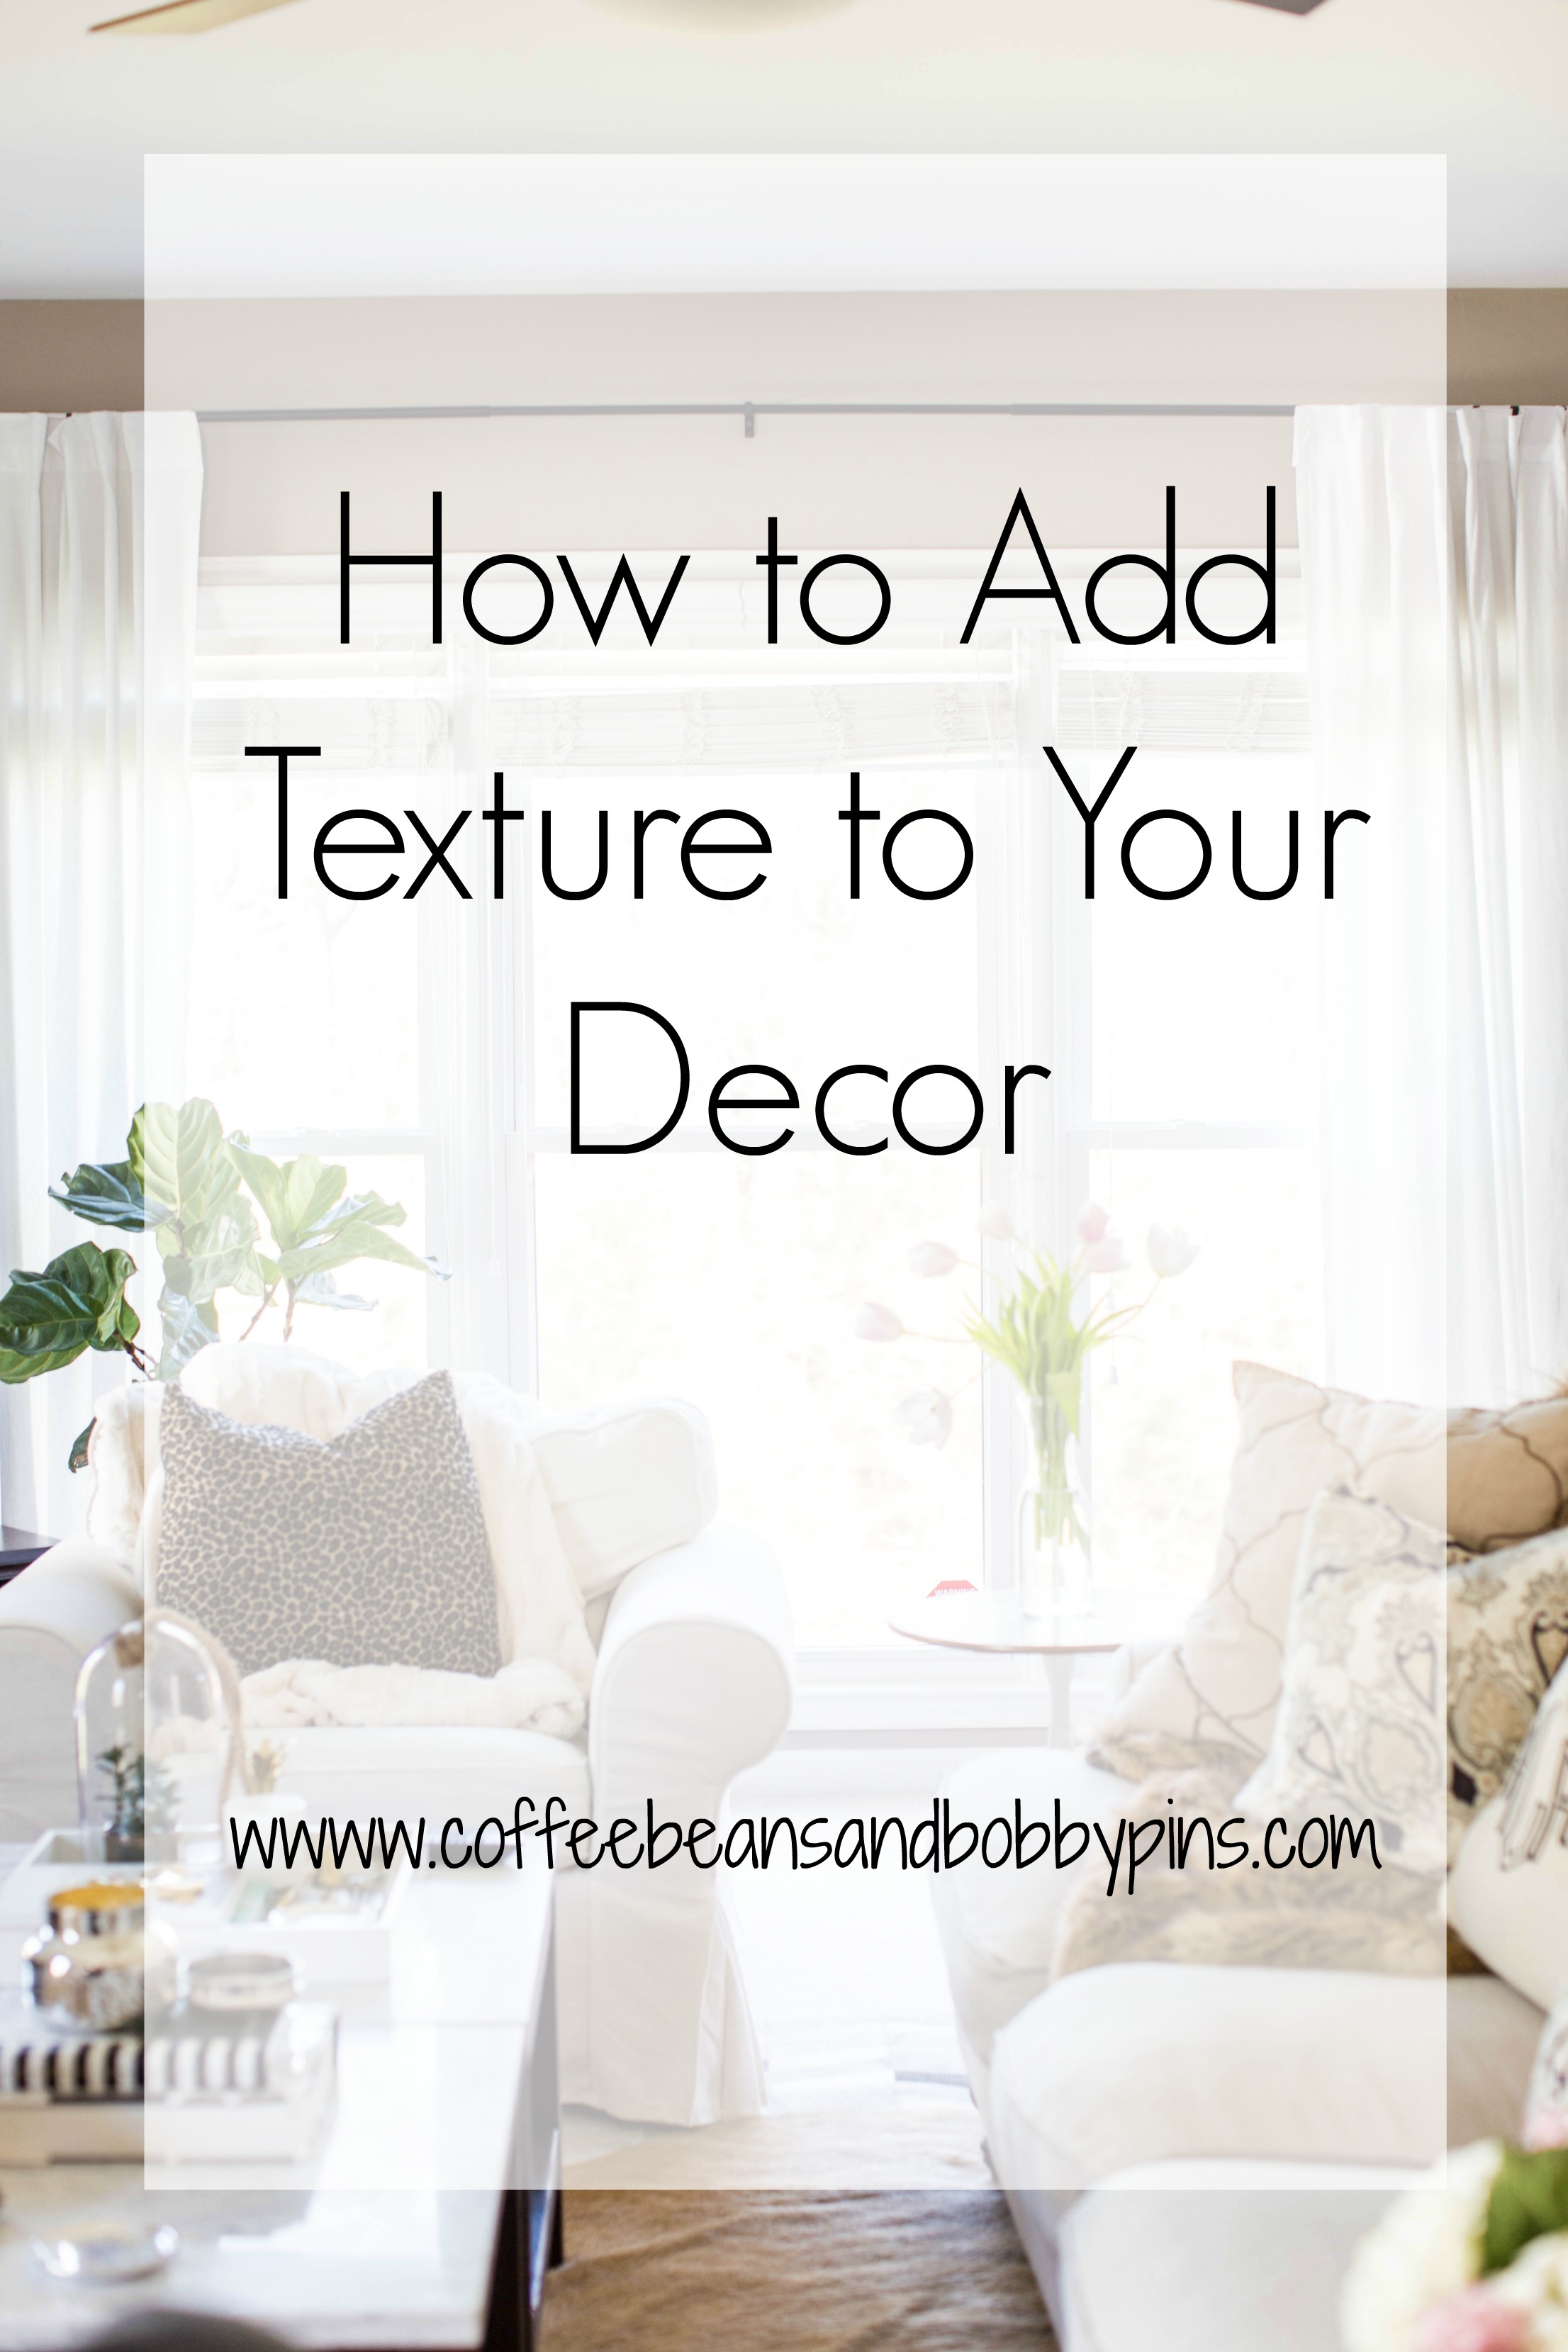 How to Add Texture to Your Home | coffeebeansandbobbypins.com